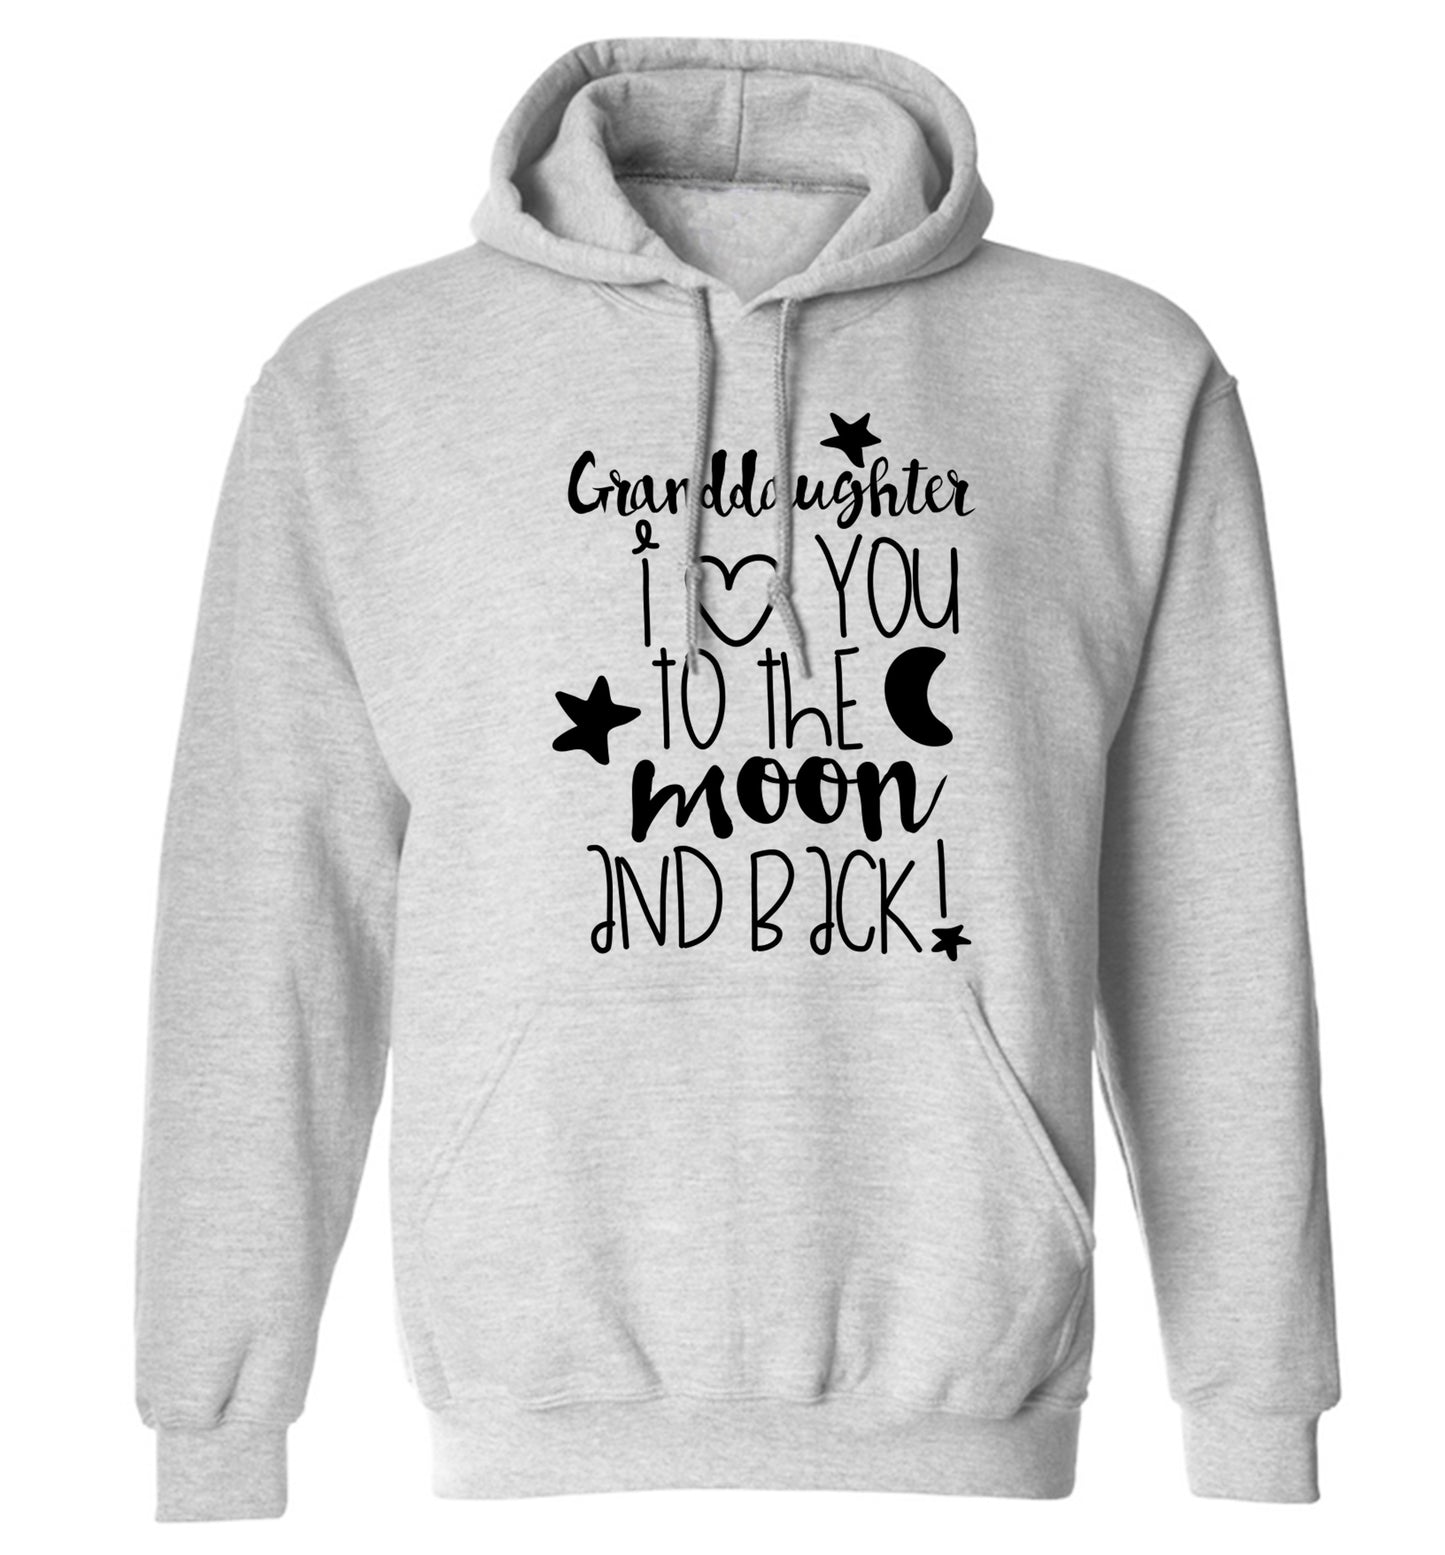 Granddaughter I love you to the moon and back adults unisex grey hoodie 2XL